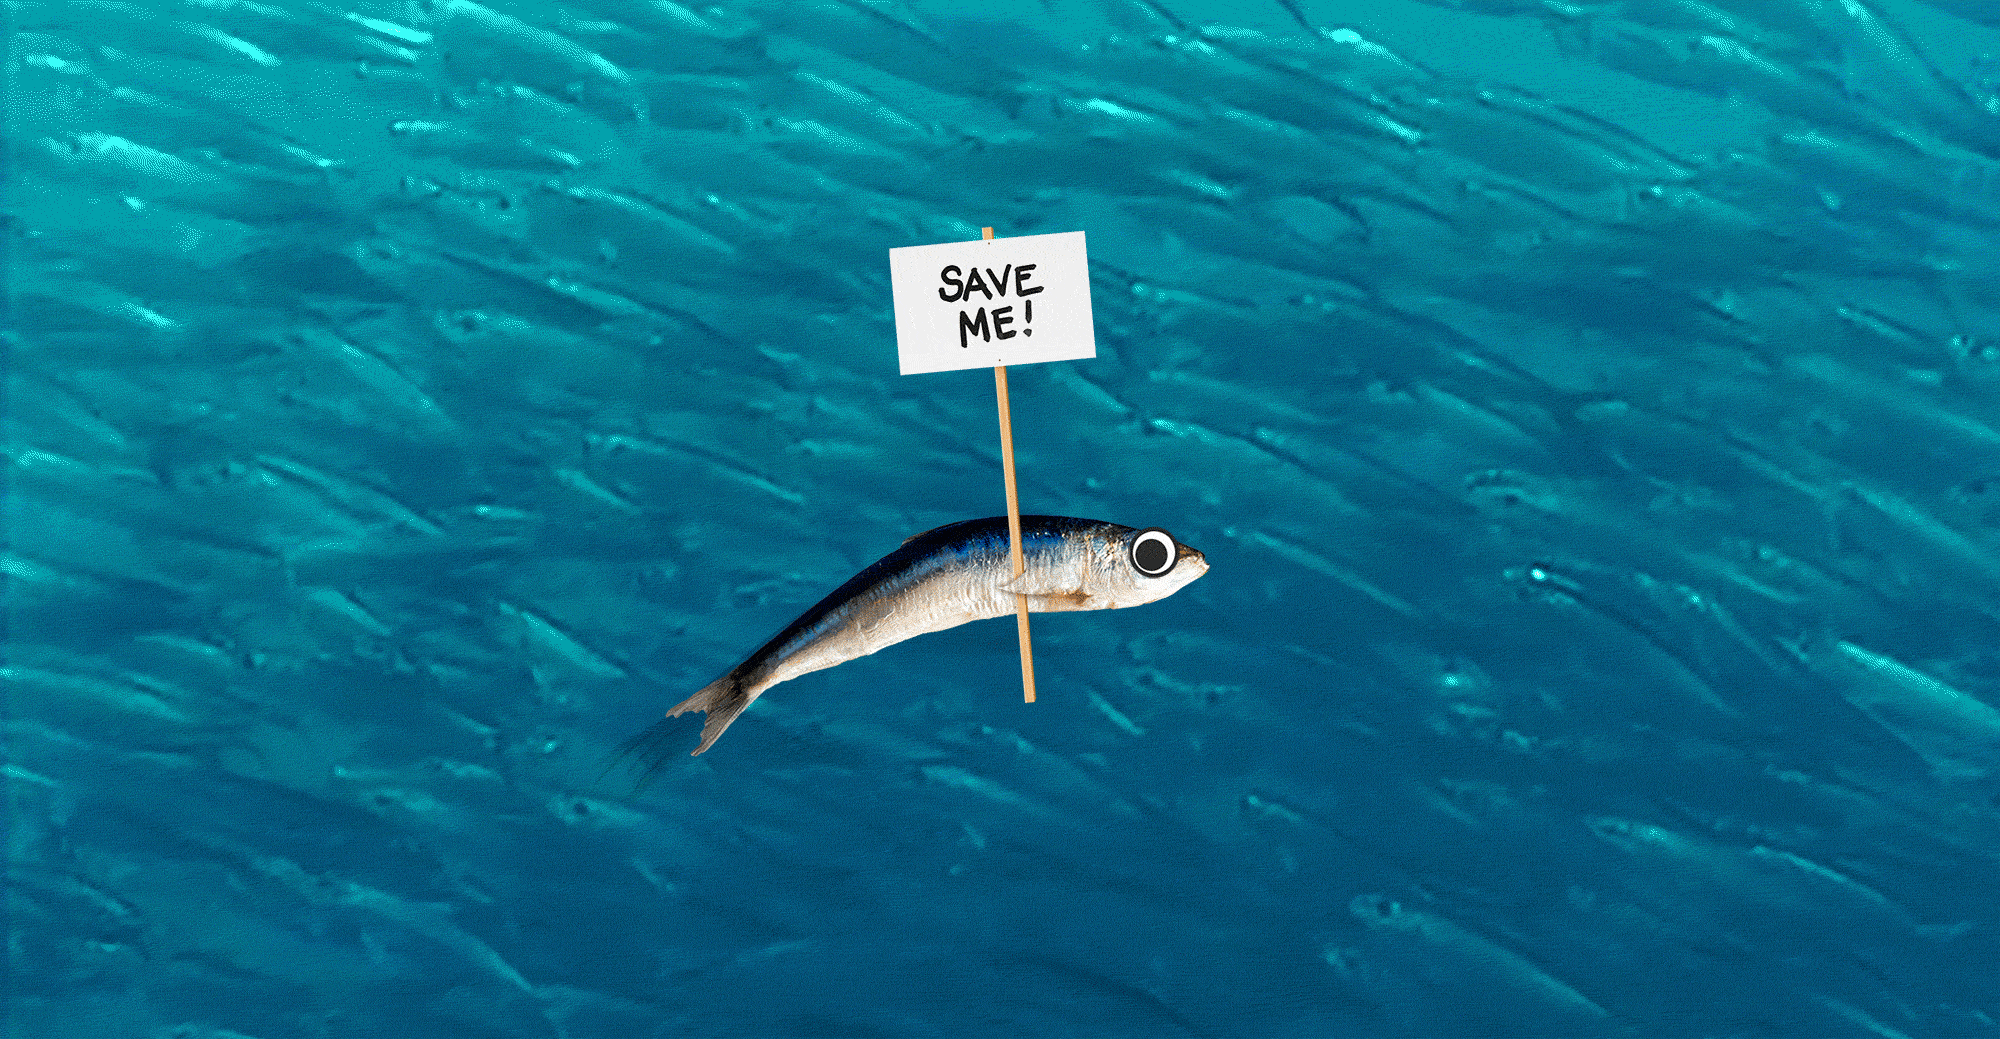 Animated graphic of the ocean, full of small silver-colored fish, with one in front holding a sign that says "Save me!"